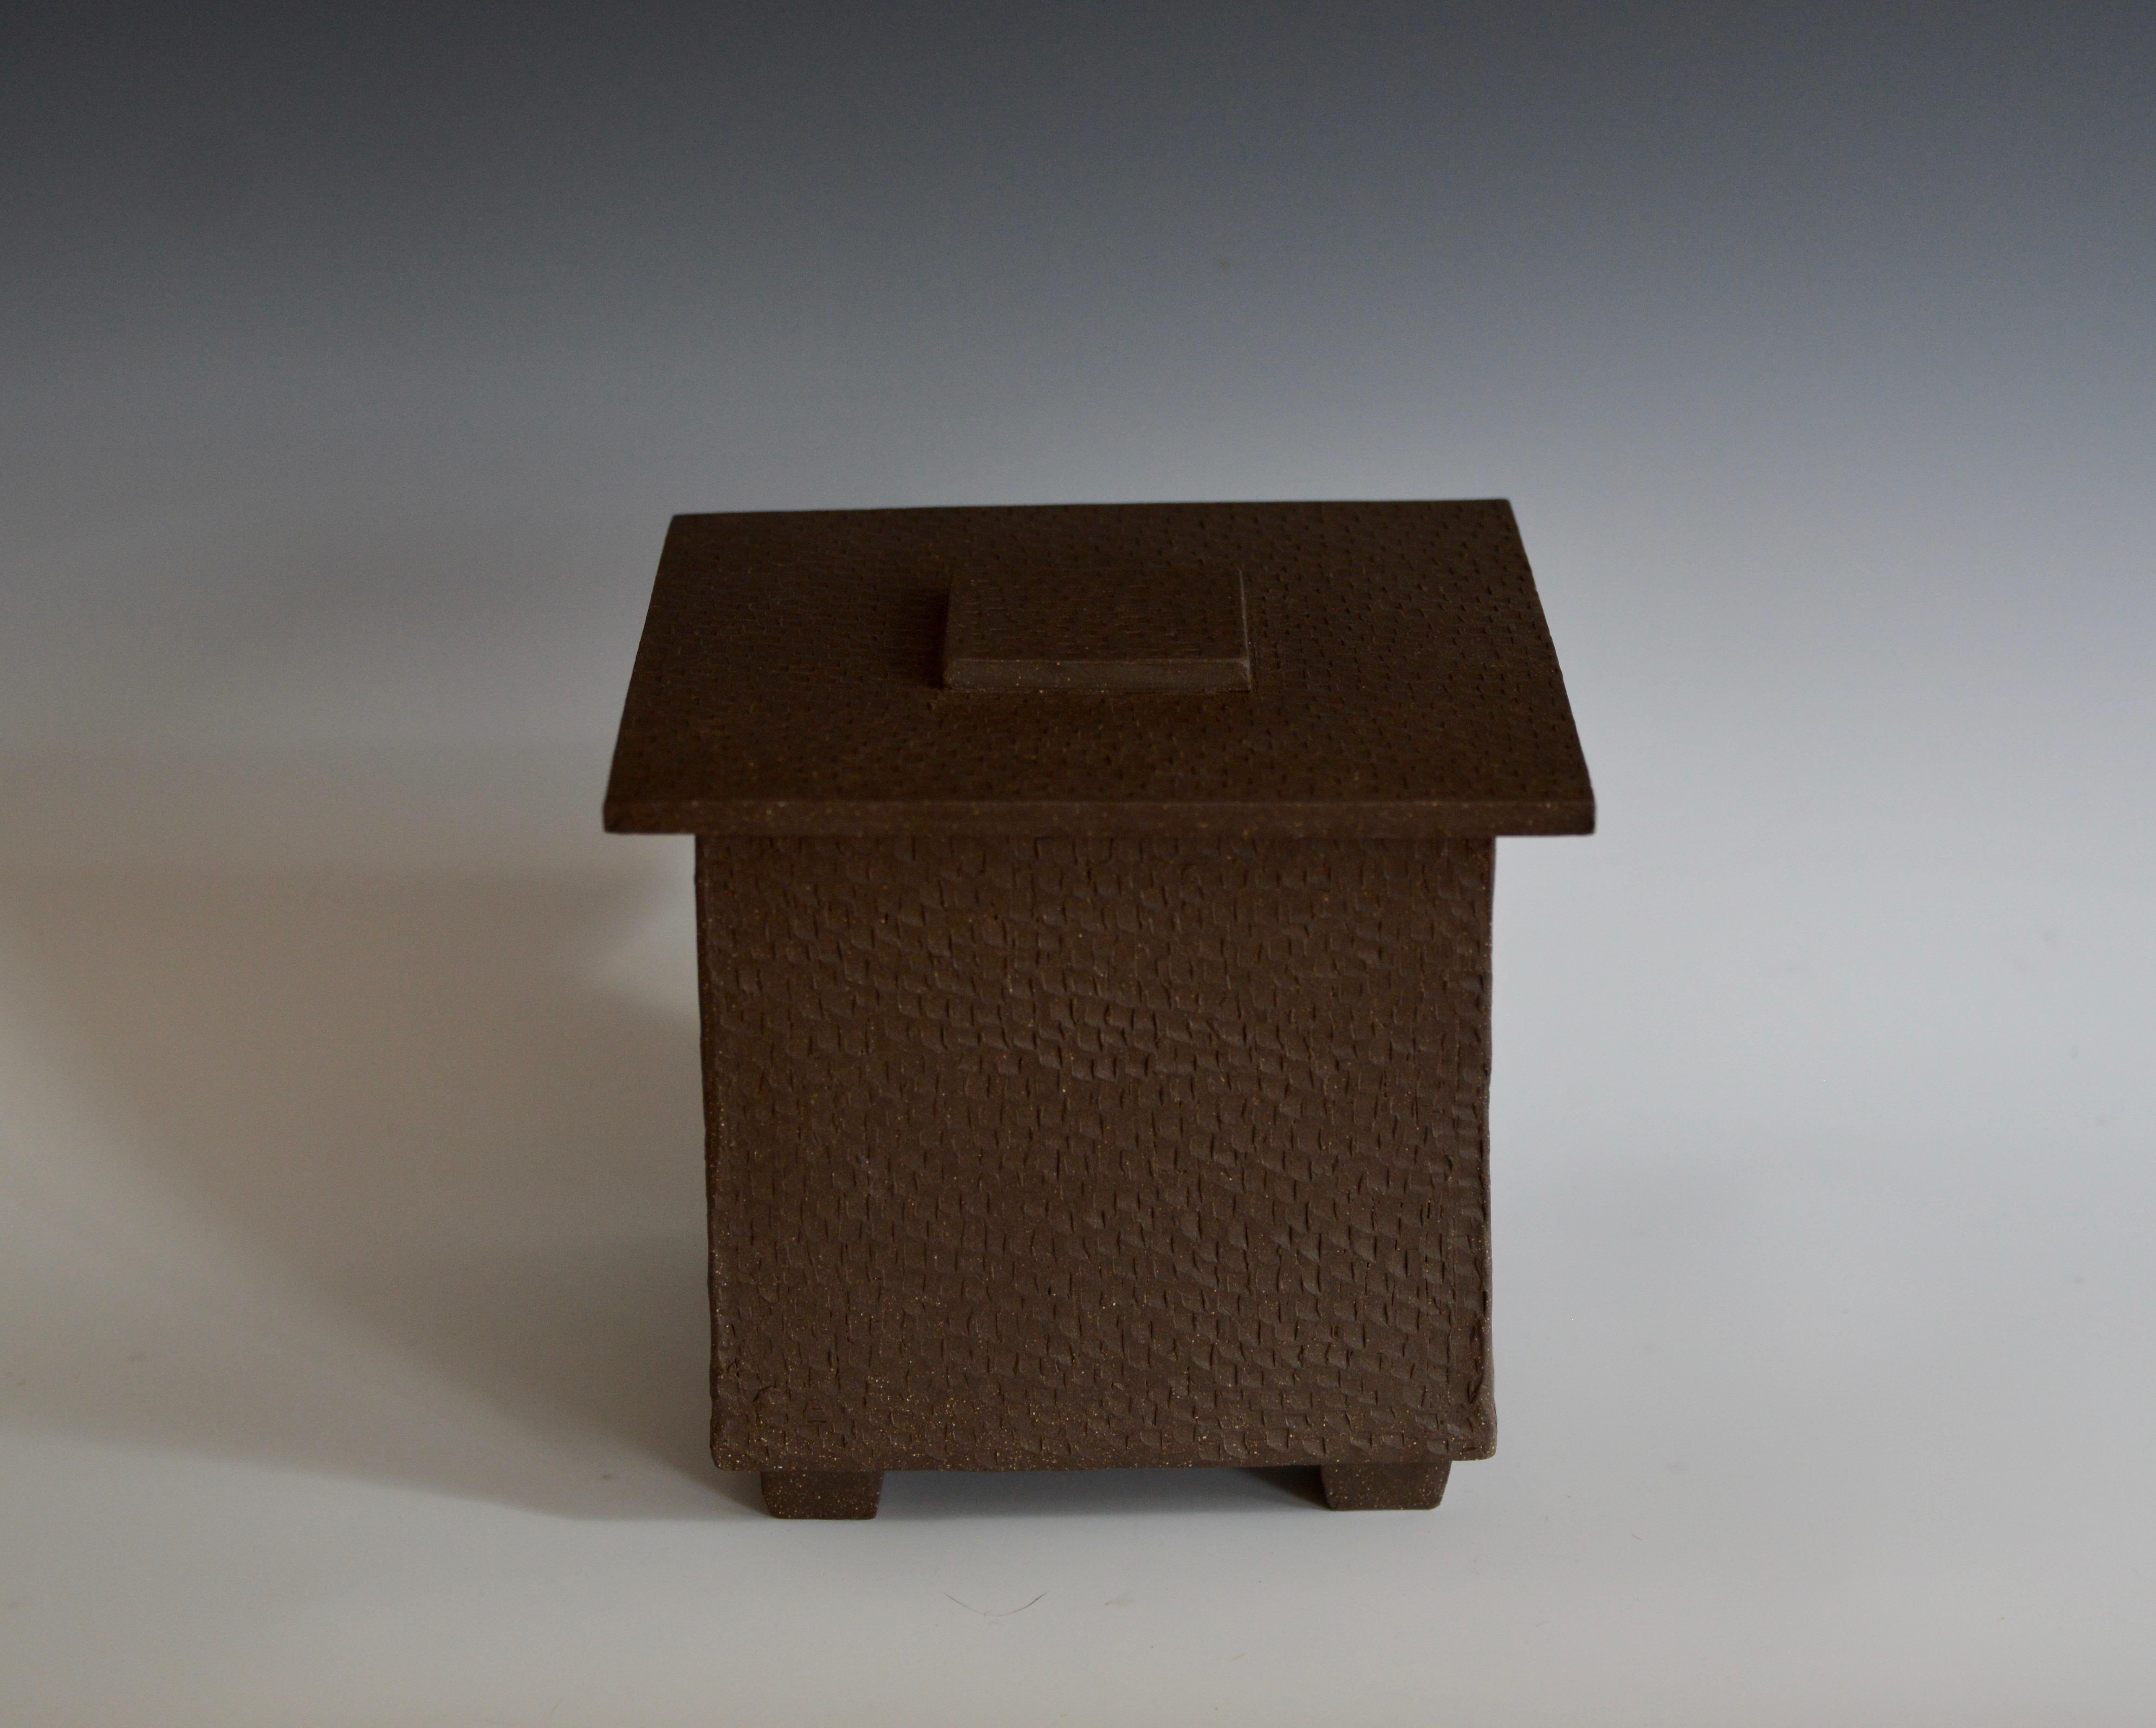 Ceramic Hand-Textured Box in Raw Brown Clay with Orange Glazed Interior and Lid